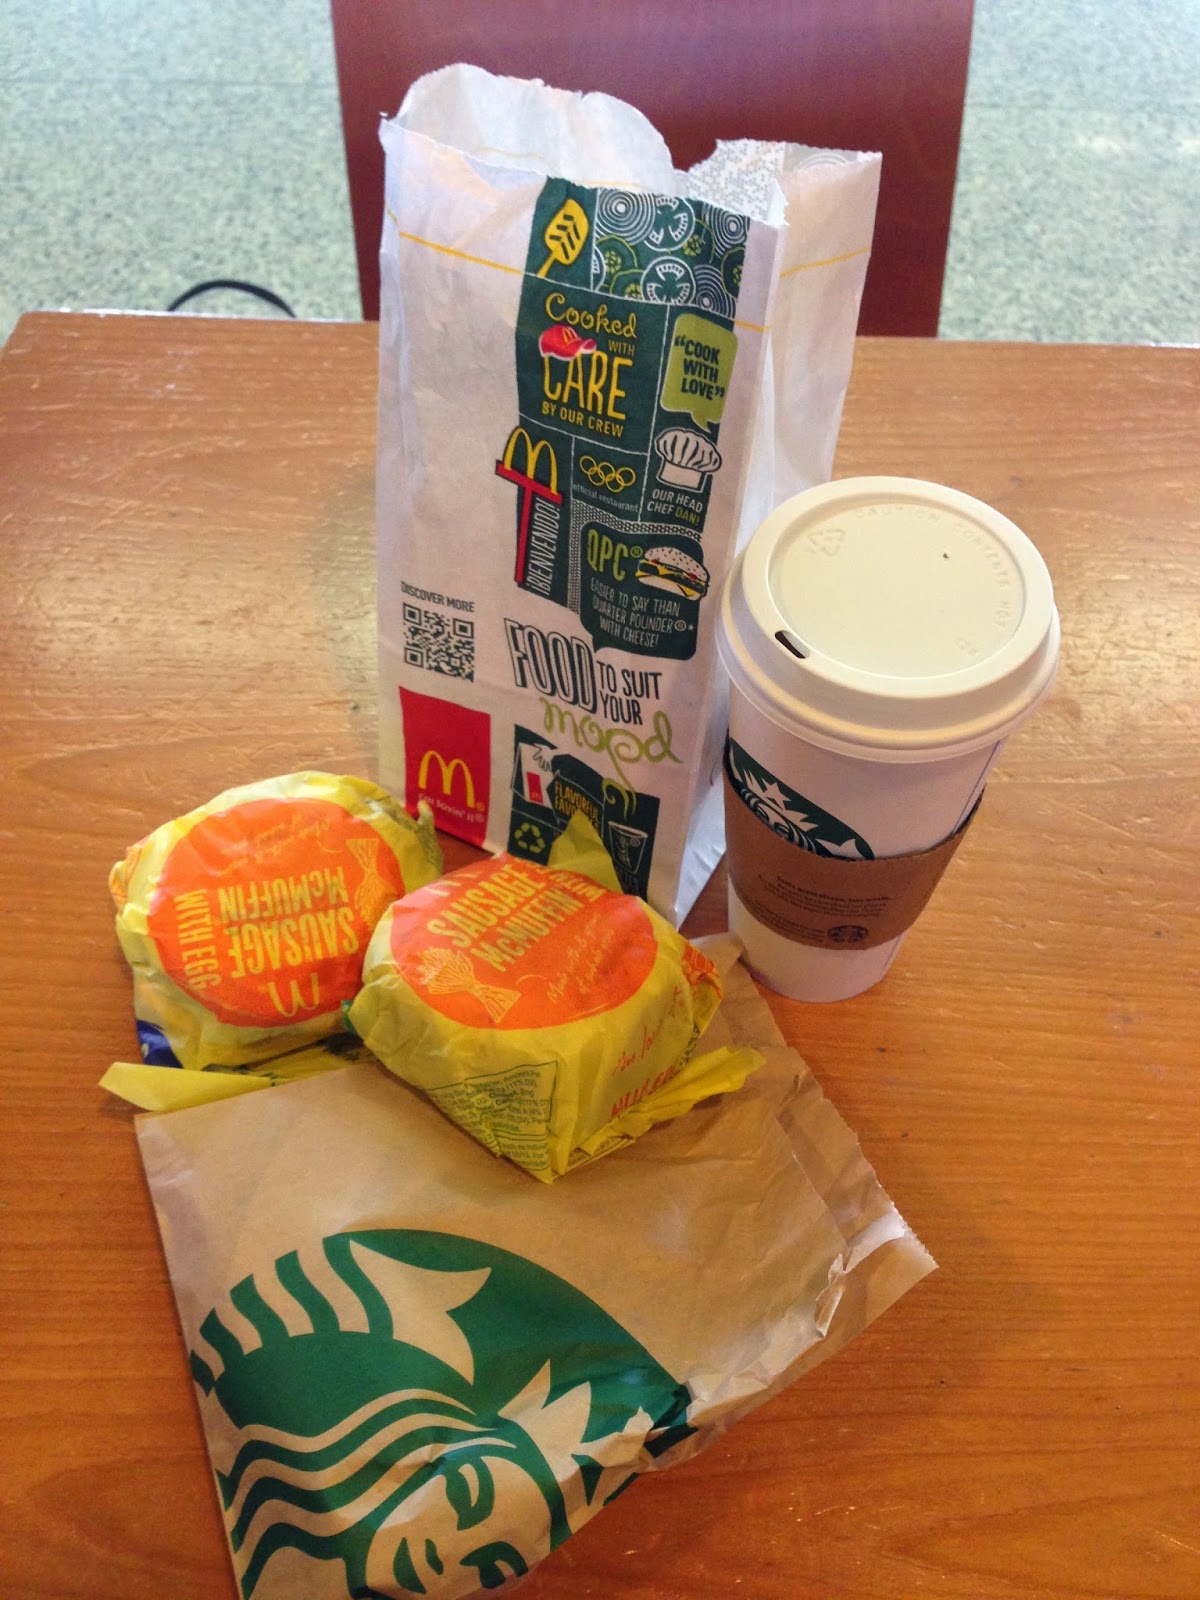 Our breakfast in the Chicago airport. Welcome to America!